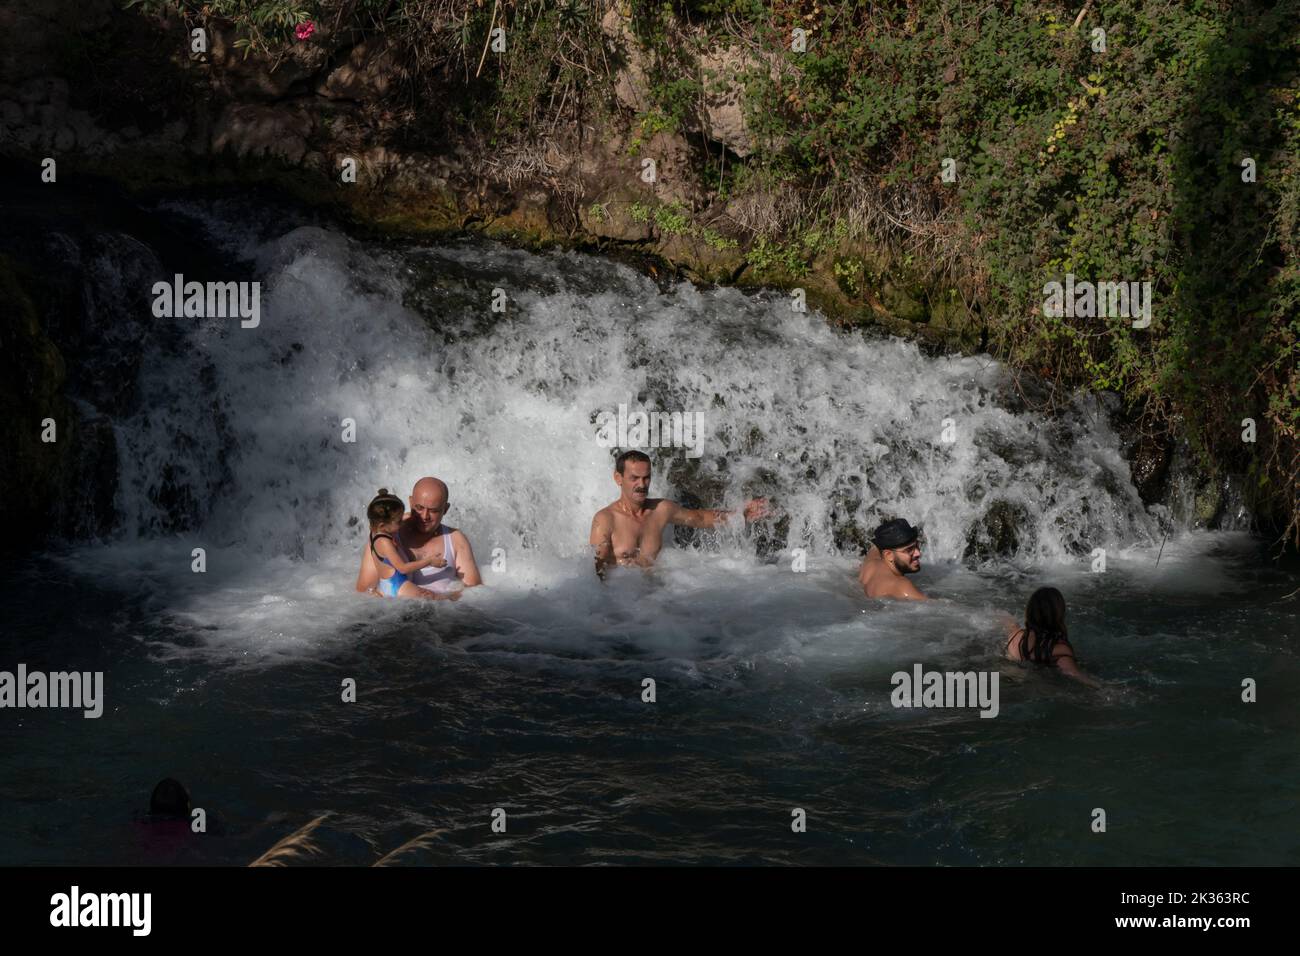 People bath in a small waterfall at a natural spring water pool in Gan HaShlosha National Park also known by its Arabic name Sakhne in Israel Stock Photo